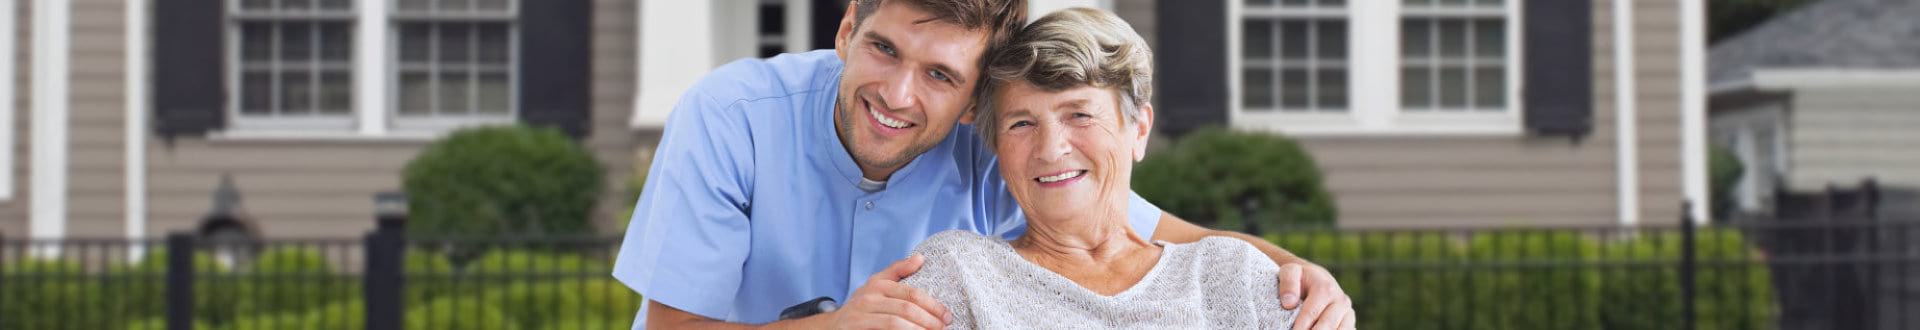 senior woman with male caregiver smiling